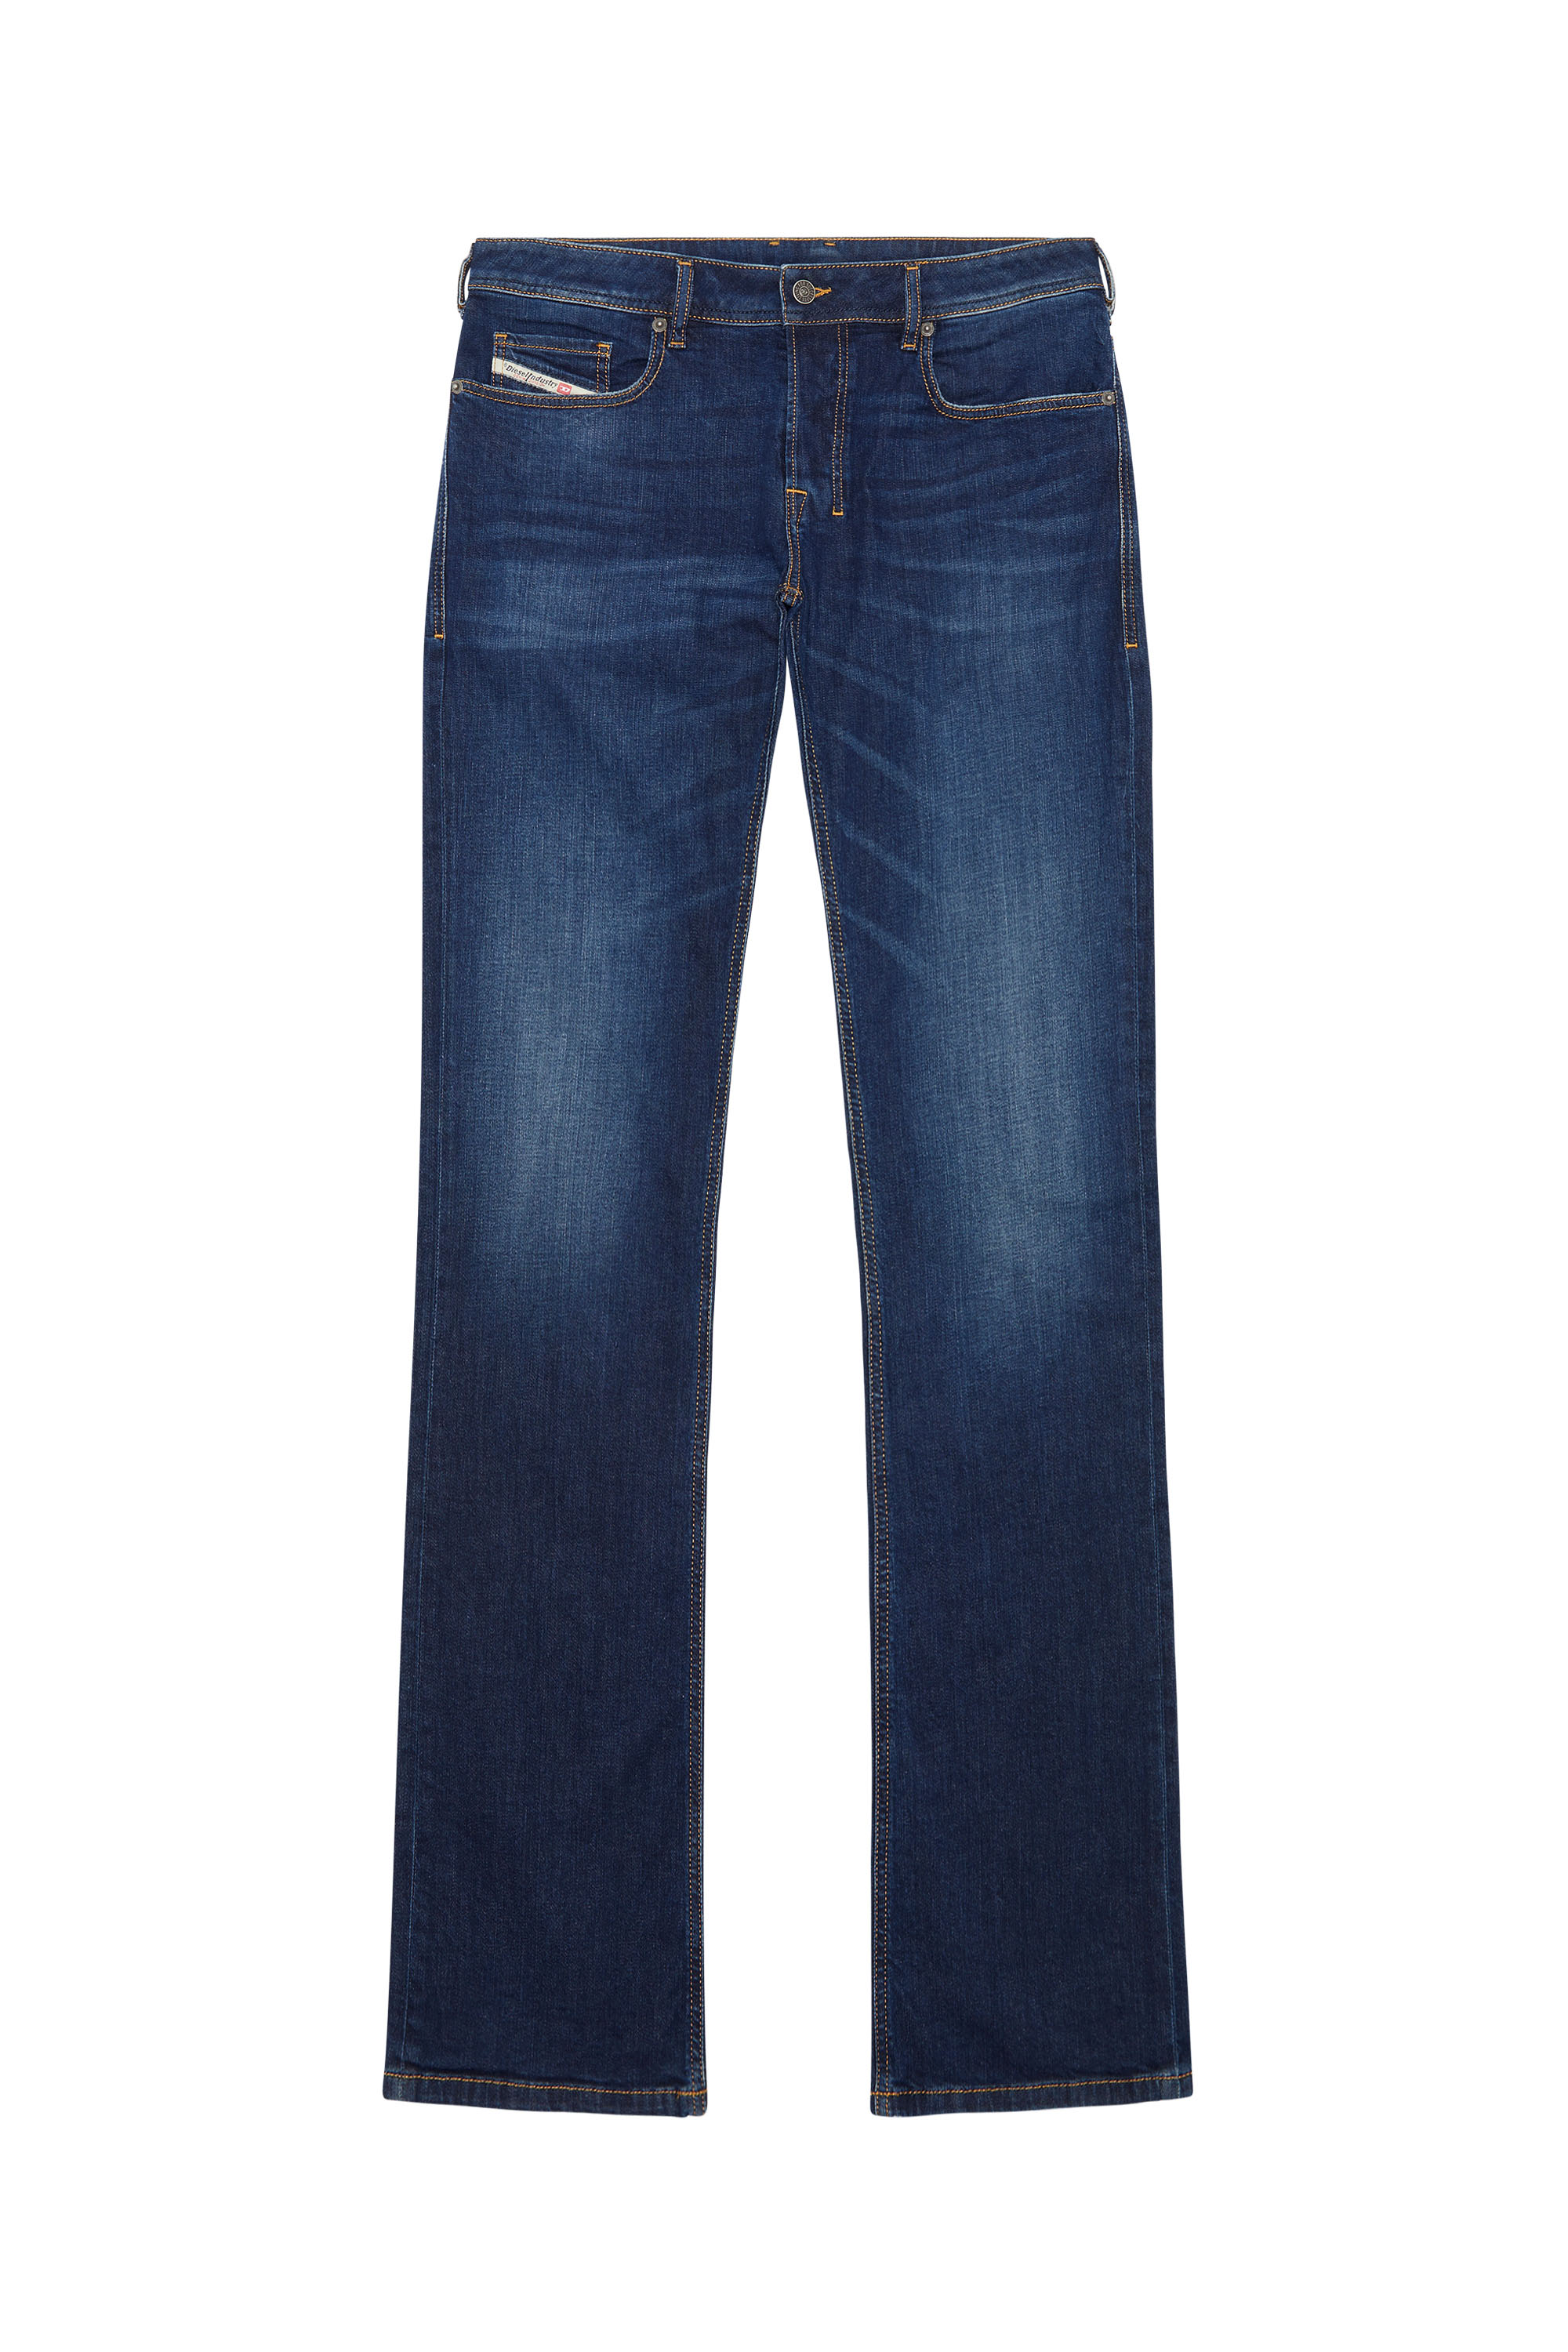 Diesel - Bootcut Jeans Zatiny 082AY,  - Image 5